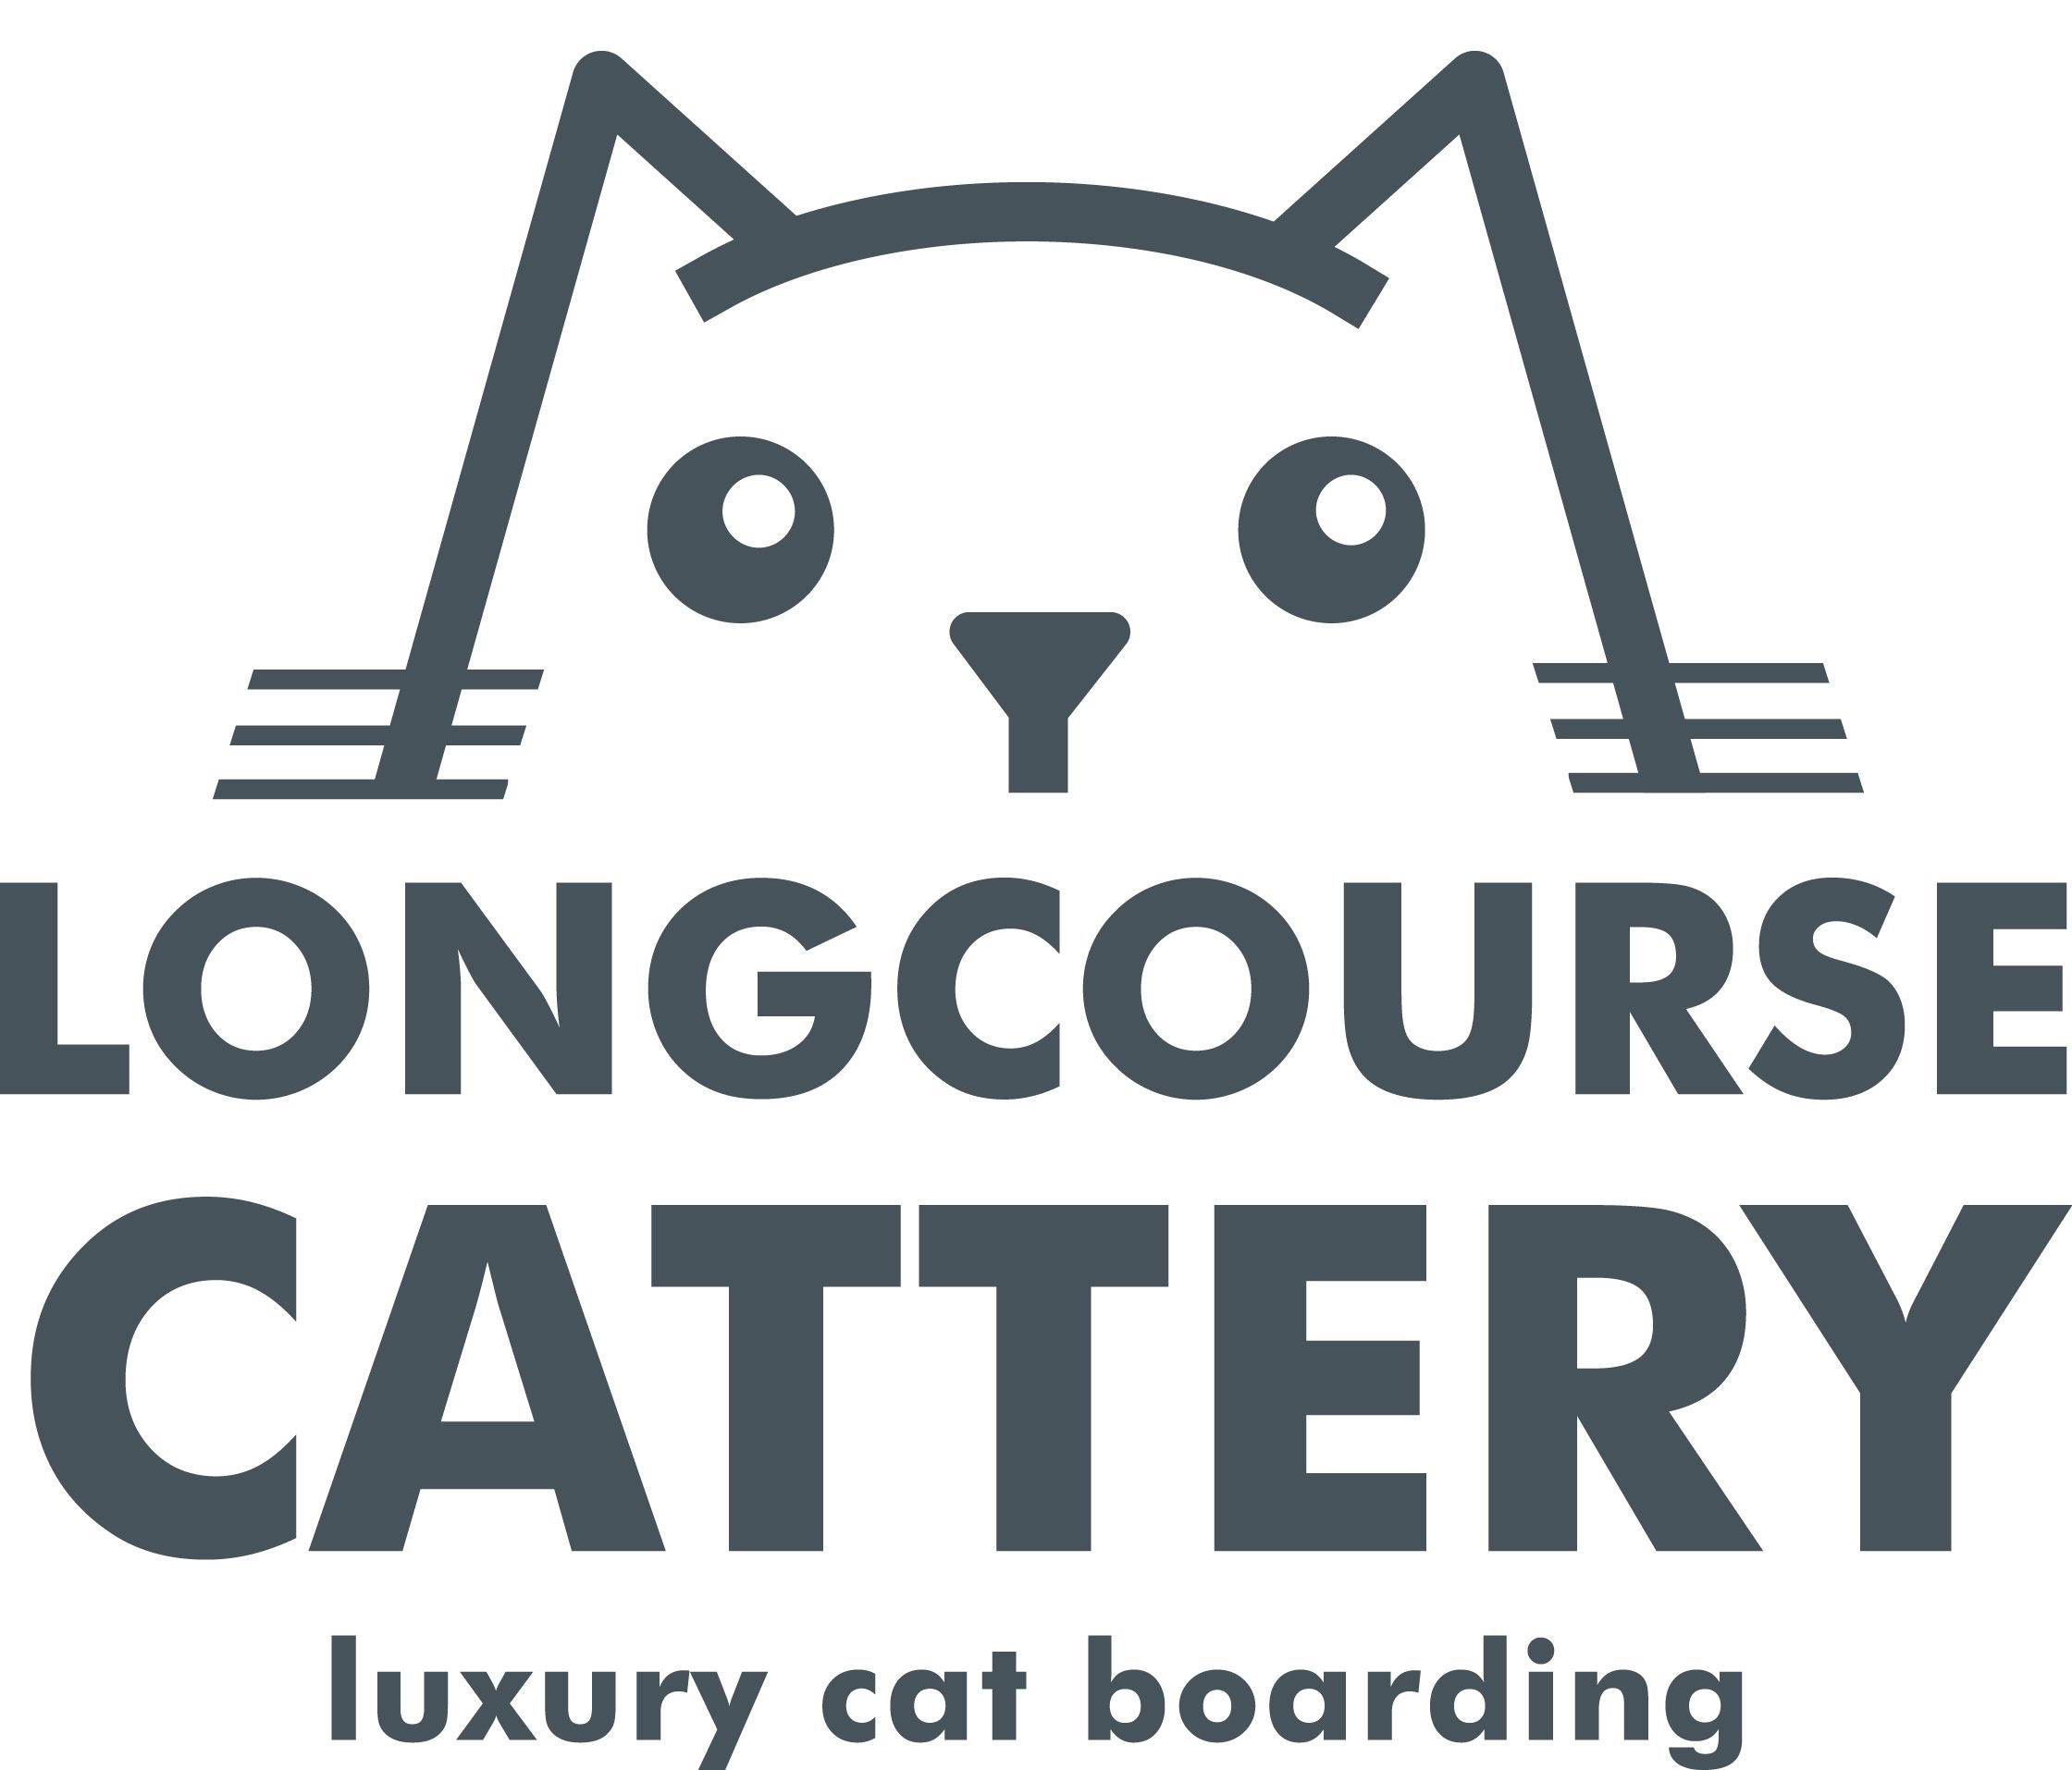 Longcourse Cattery